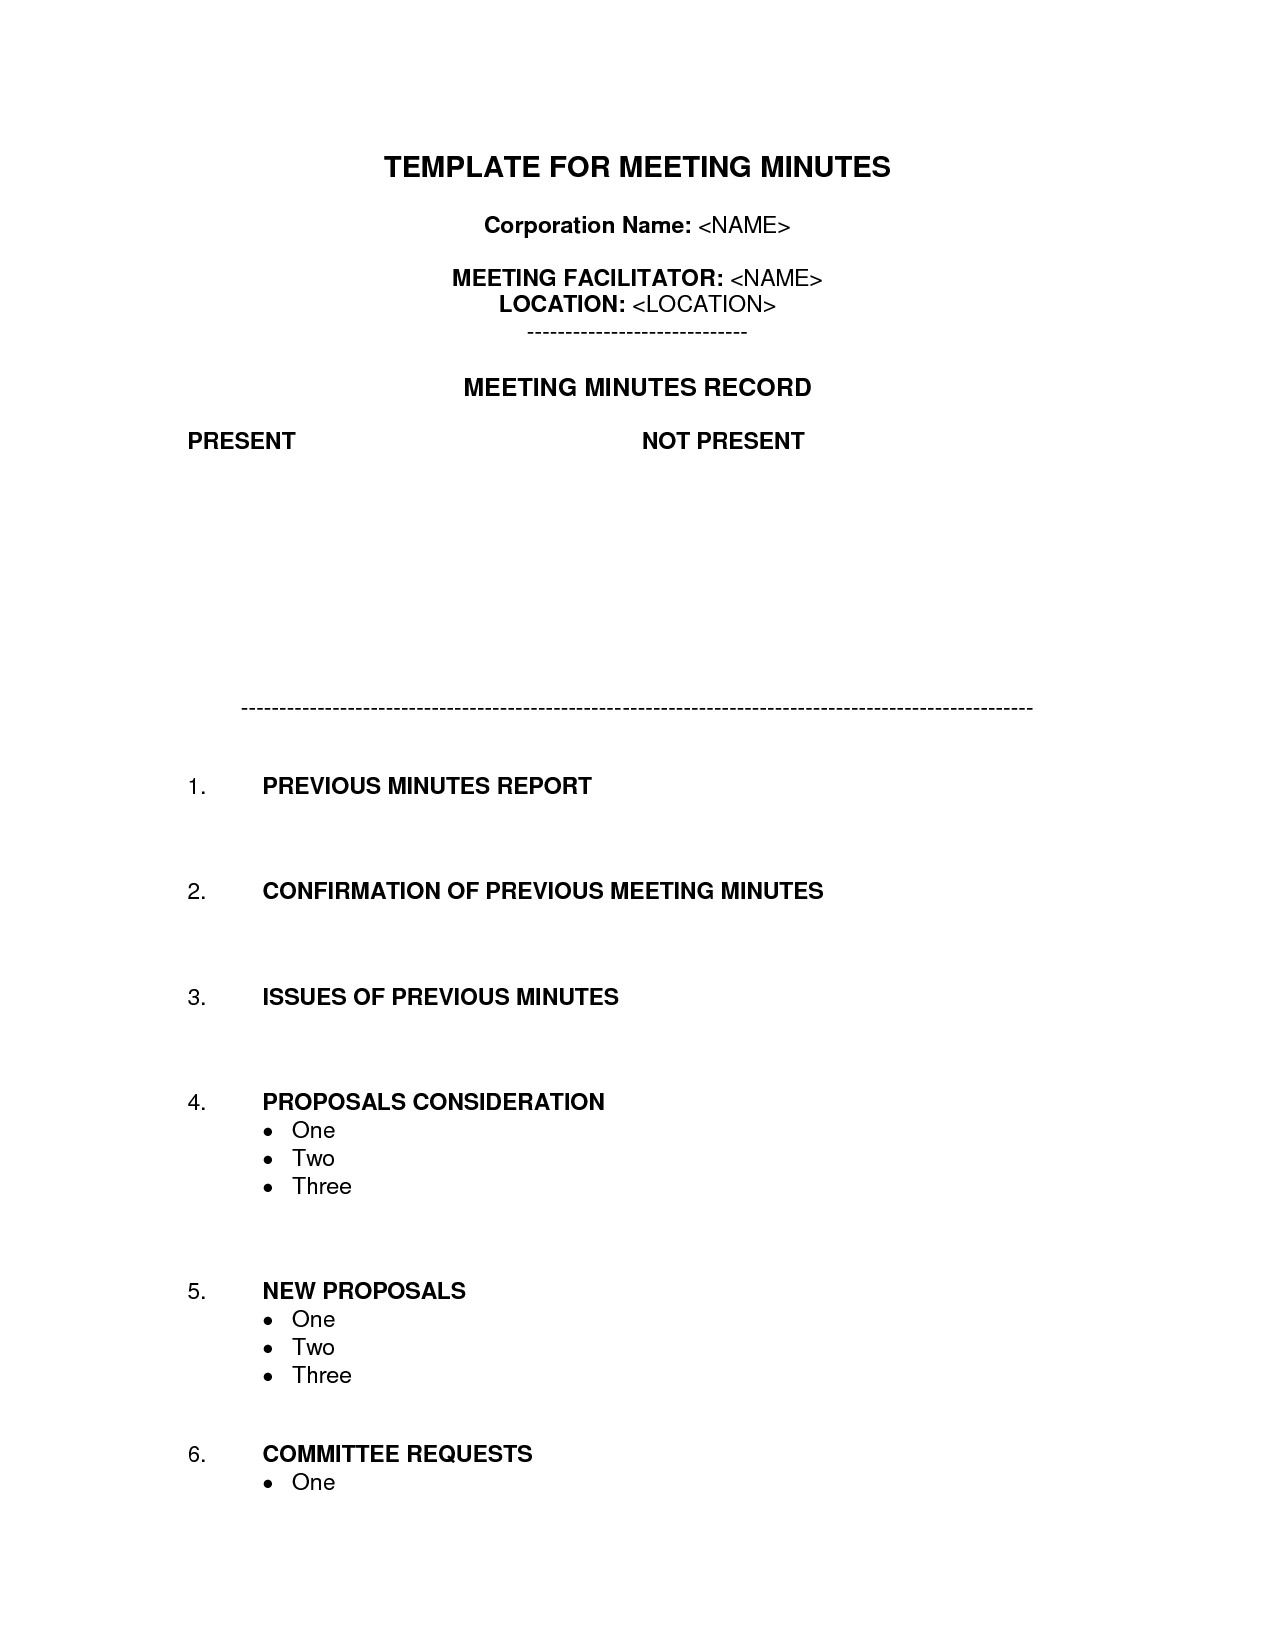 Staff Meeting Minutes Template Word Bagnas Corporation within measurements 1275 X 1650